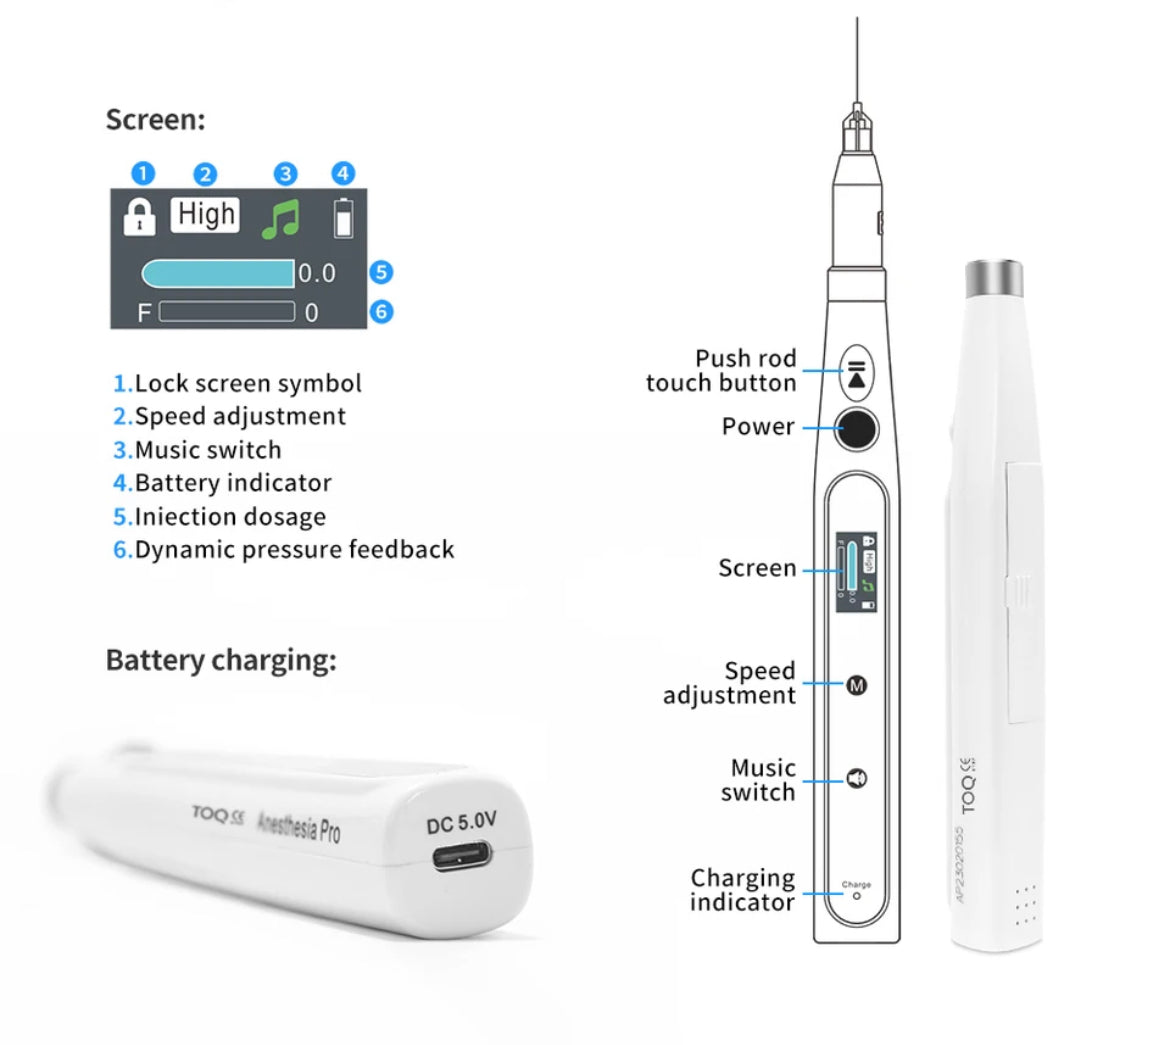 Painless anesthesia injector